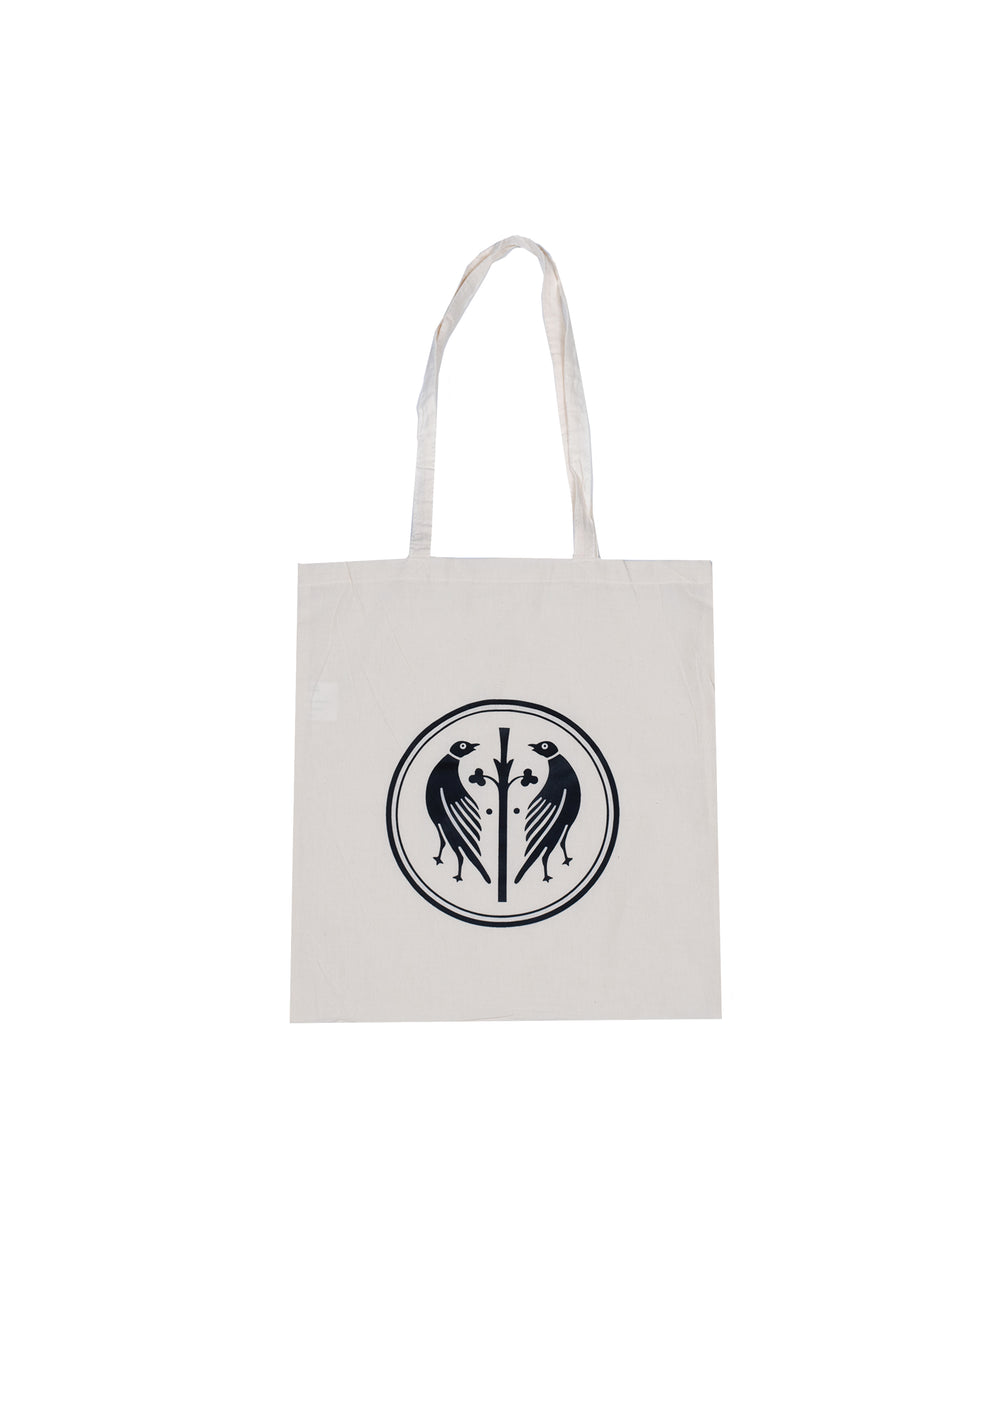 Tote bag with the BPF logo